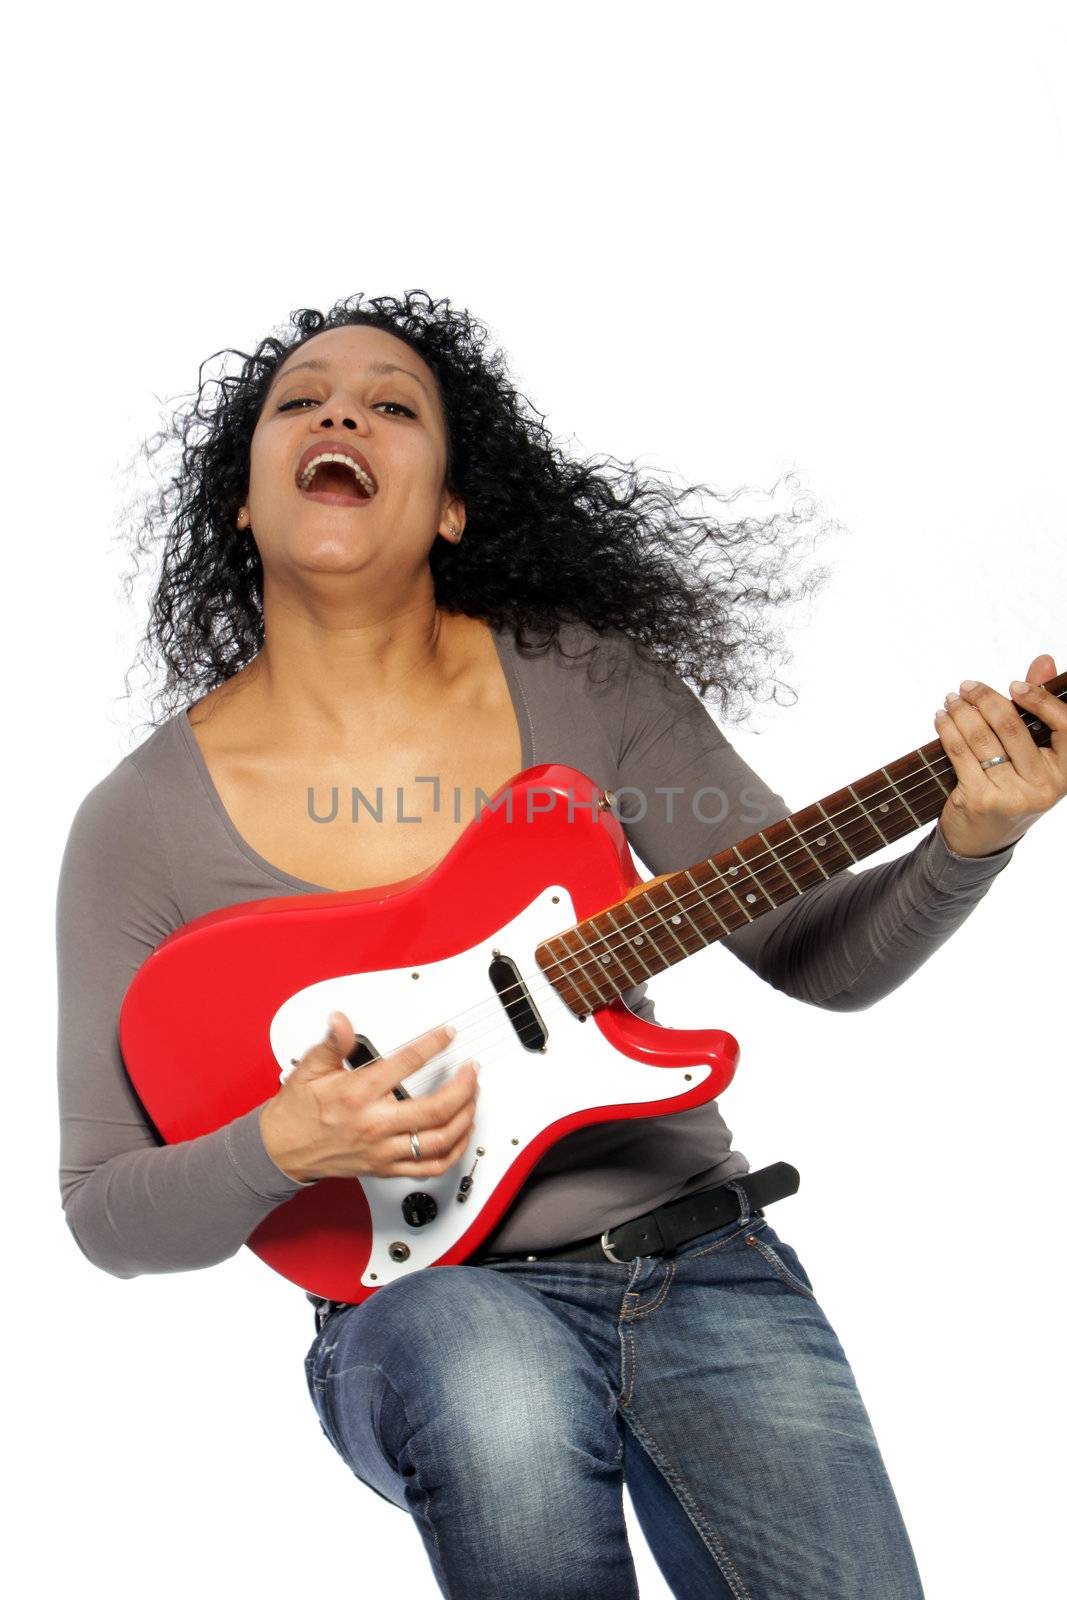 Woman with curly hair playing guitar and singing